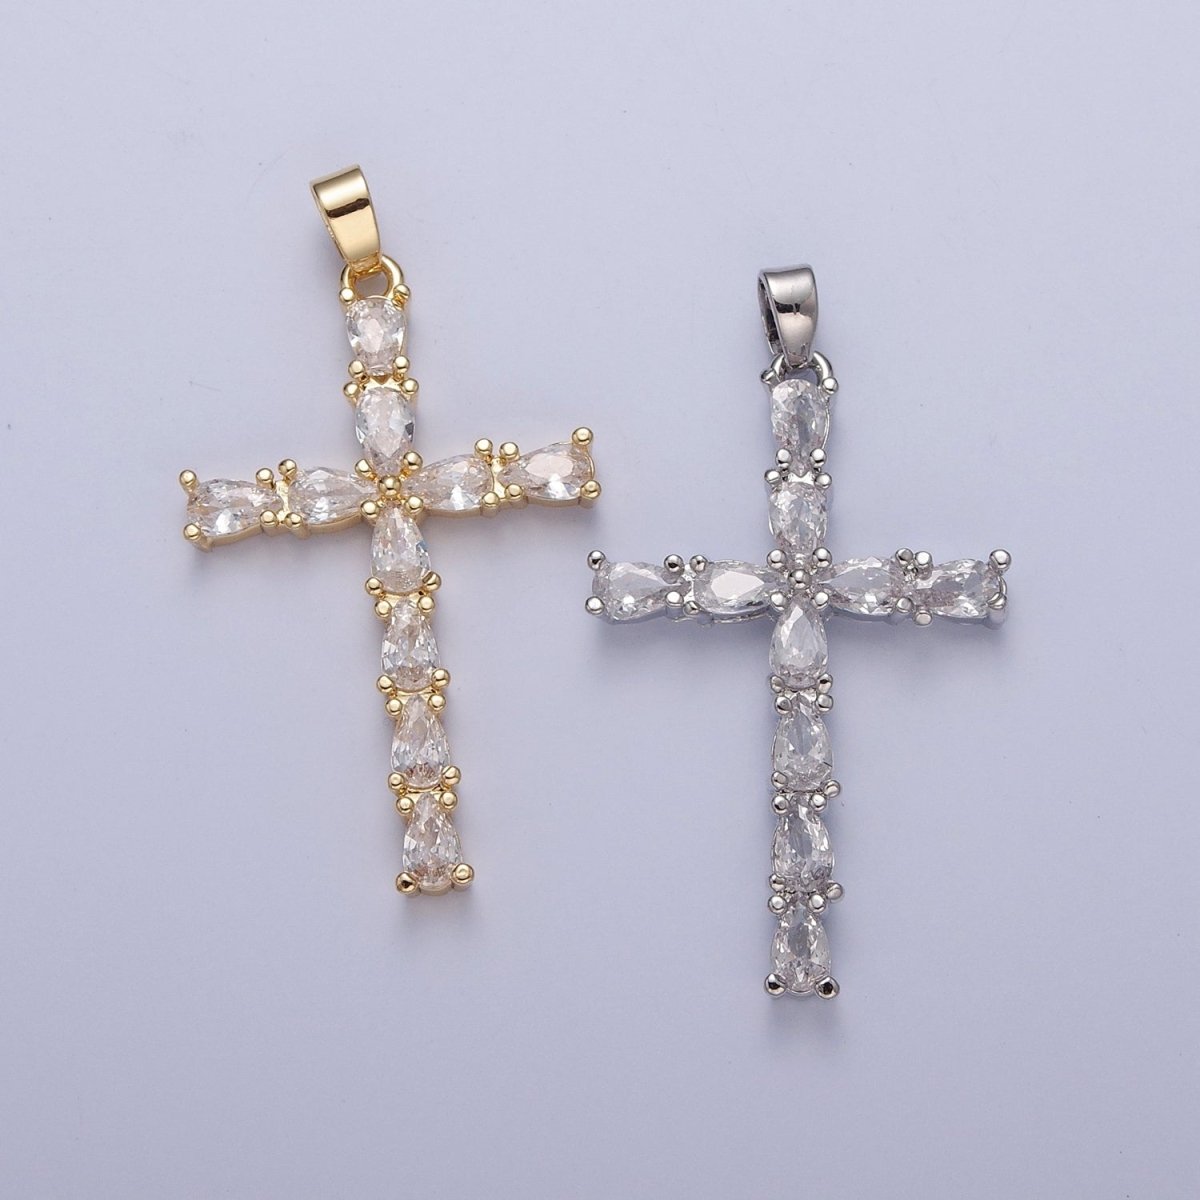 Gold / Silver Tear Drop Cz Cross Pendant for Necklace Rosary Component X-325 X-326 - DLUXCA